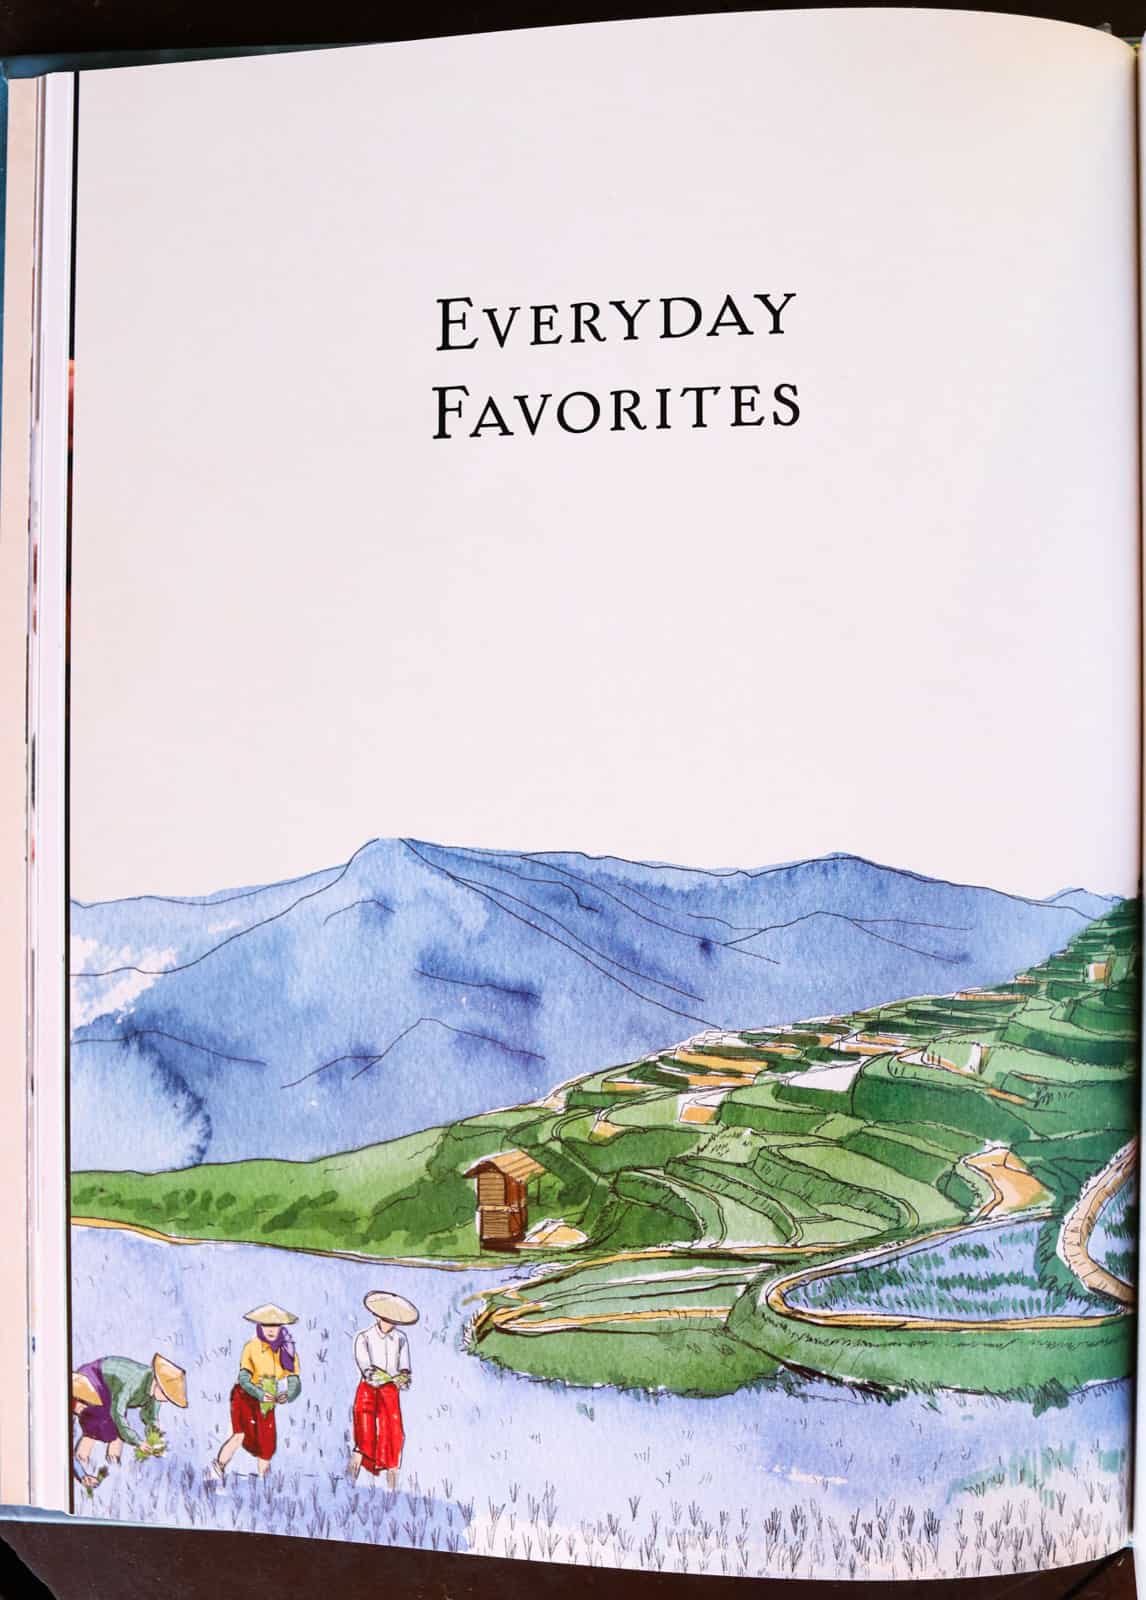 illustration for Everyday Favorites section of The Simple Art of Rice cookbook